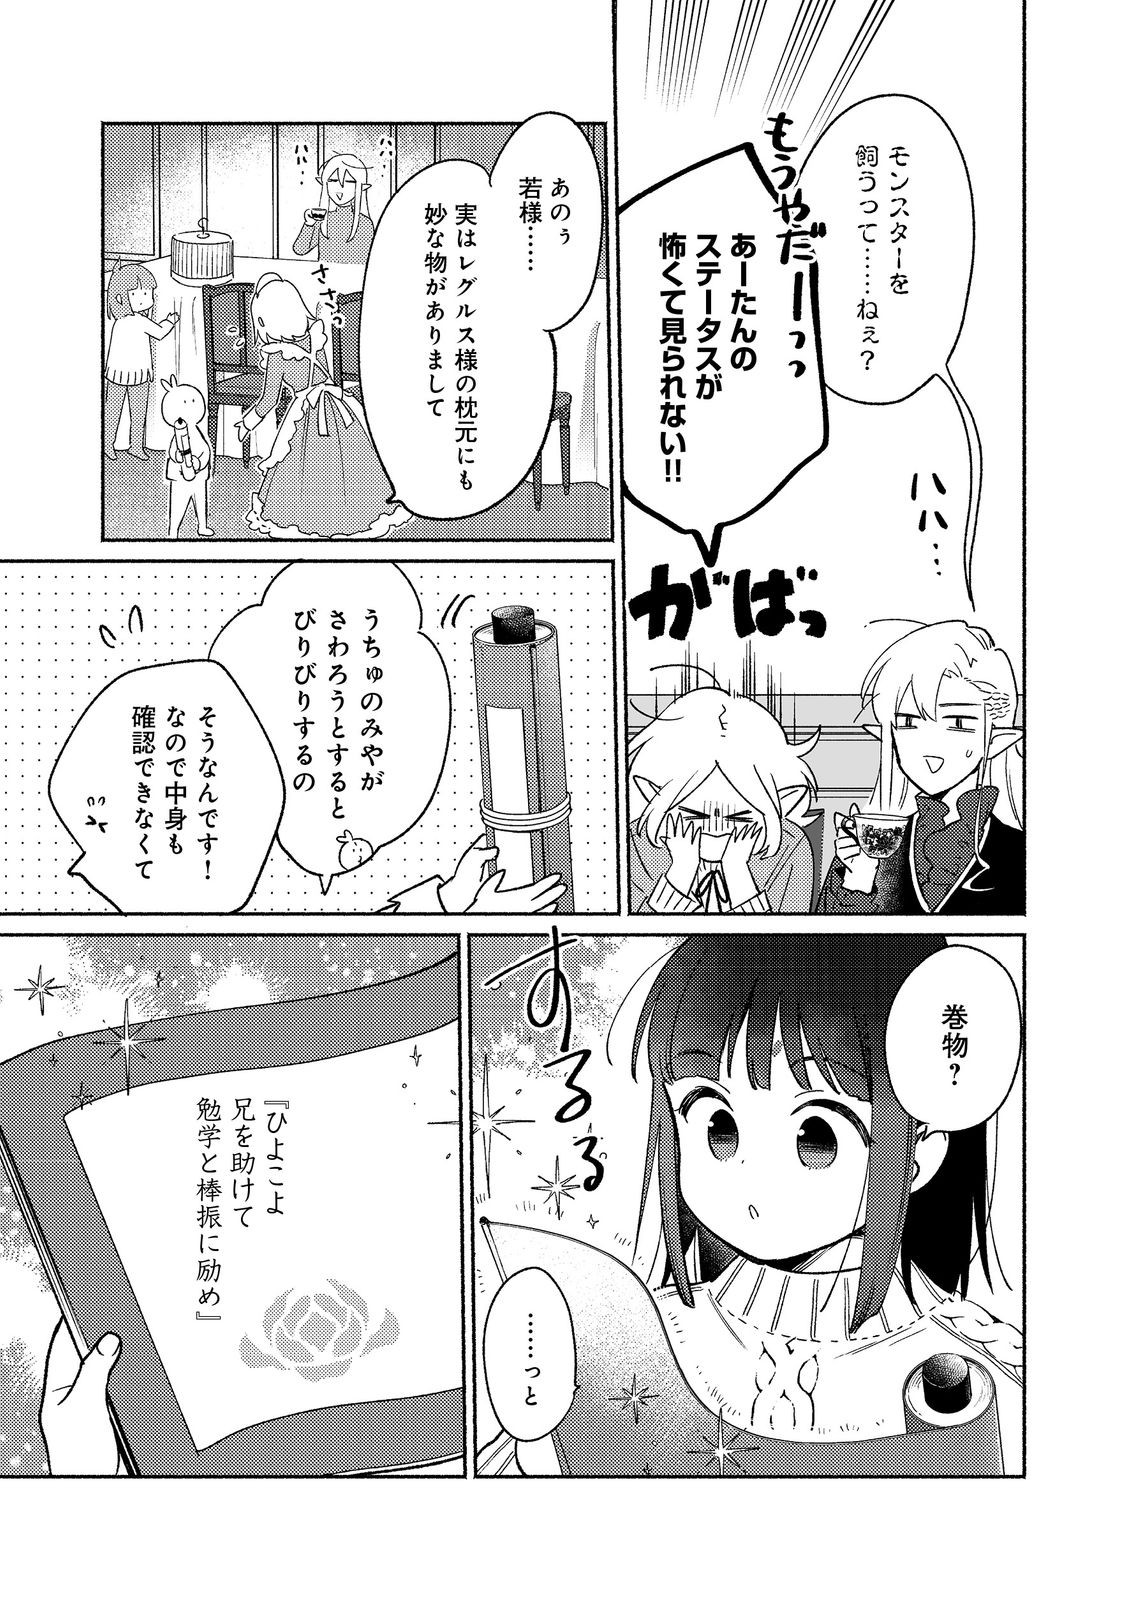 I’m the White Pig Nobleman 第27.1話 - Page 7